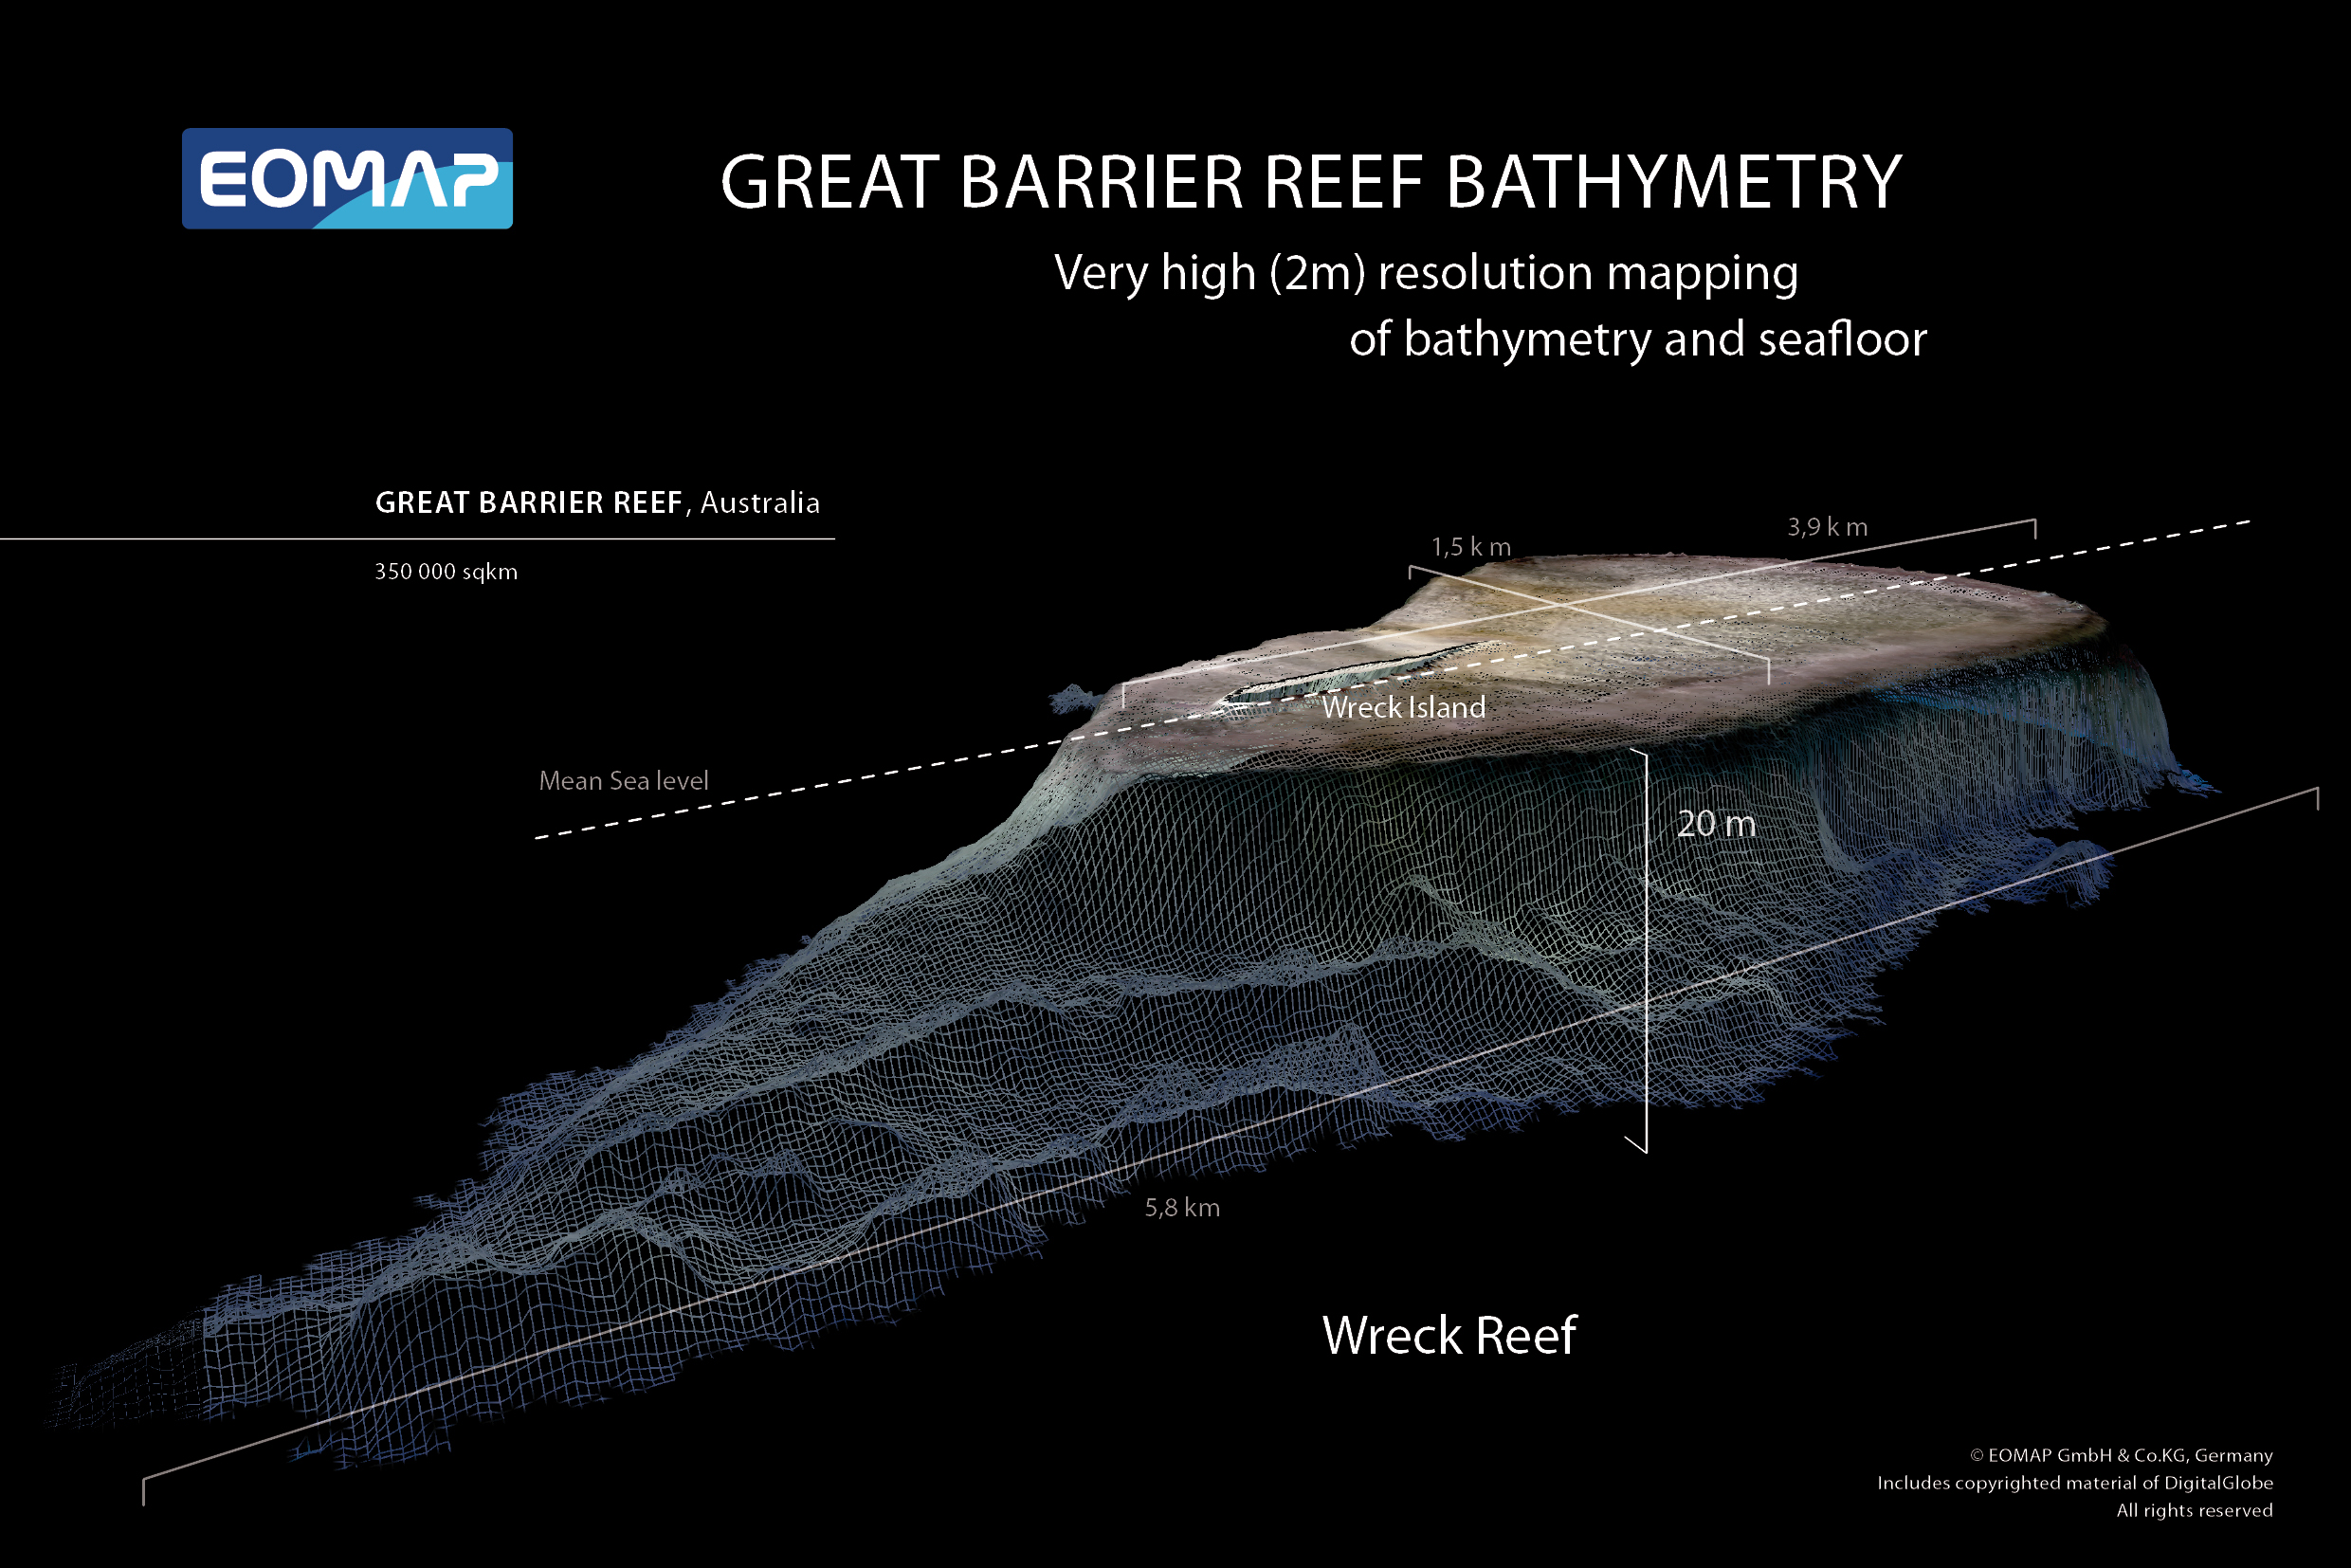 Very high resolution bathymetry maps from the Great Barrier Reef as well as other location in the world are produced on demand. Source: EOMAP